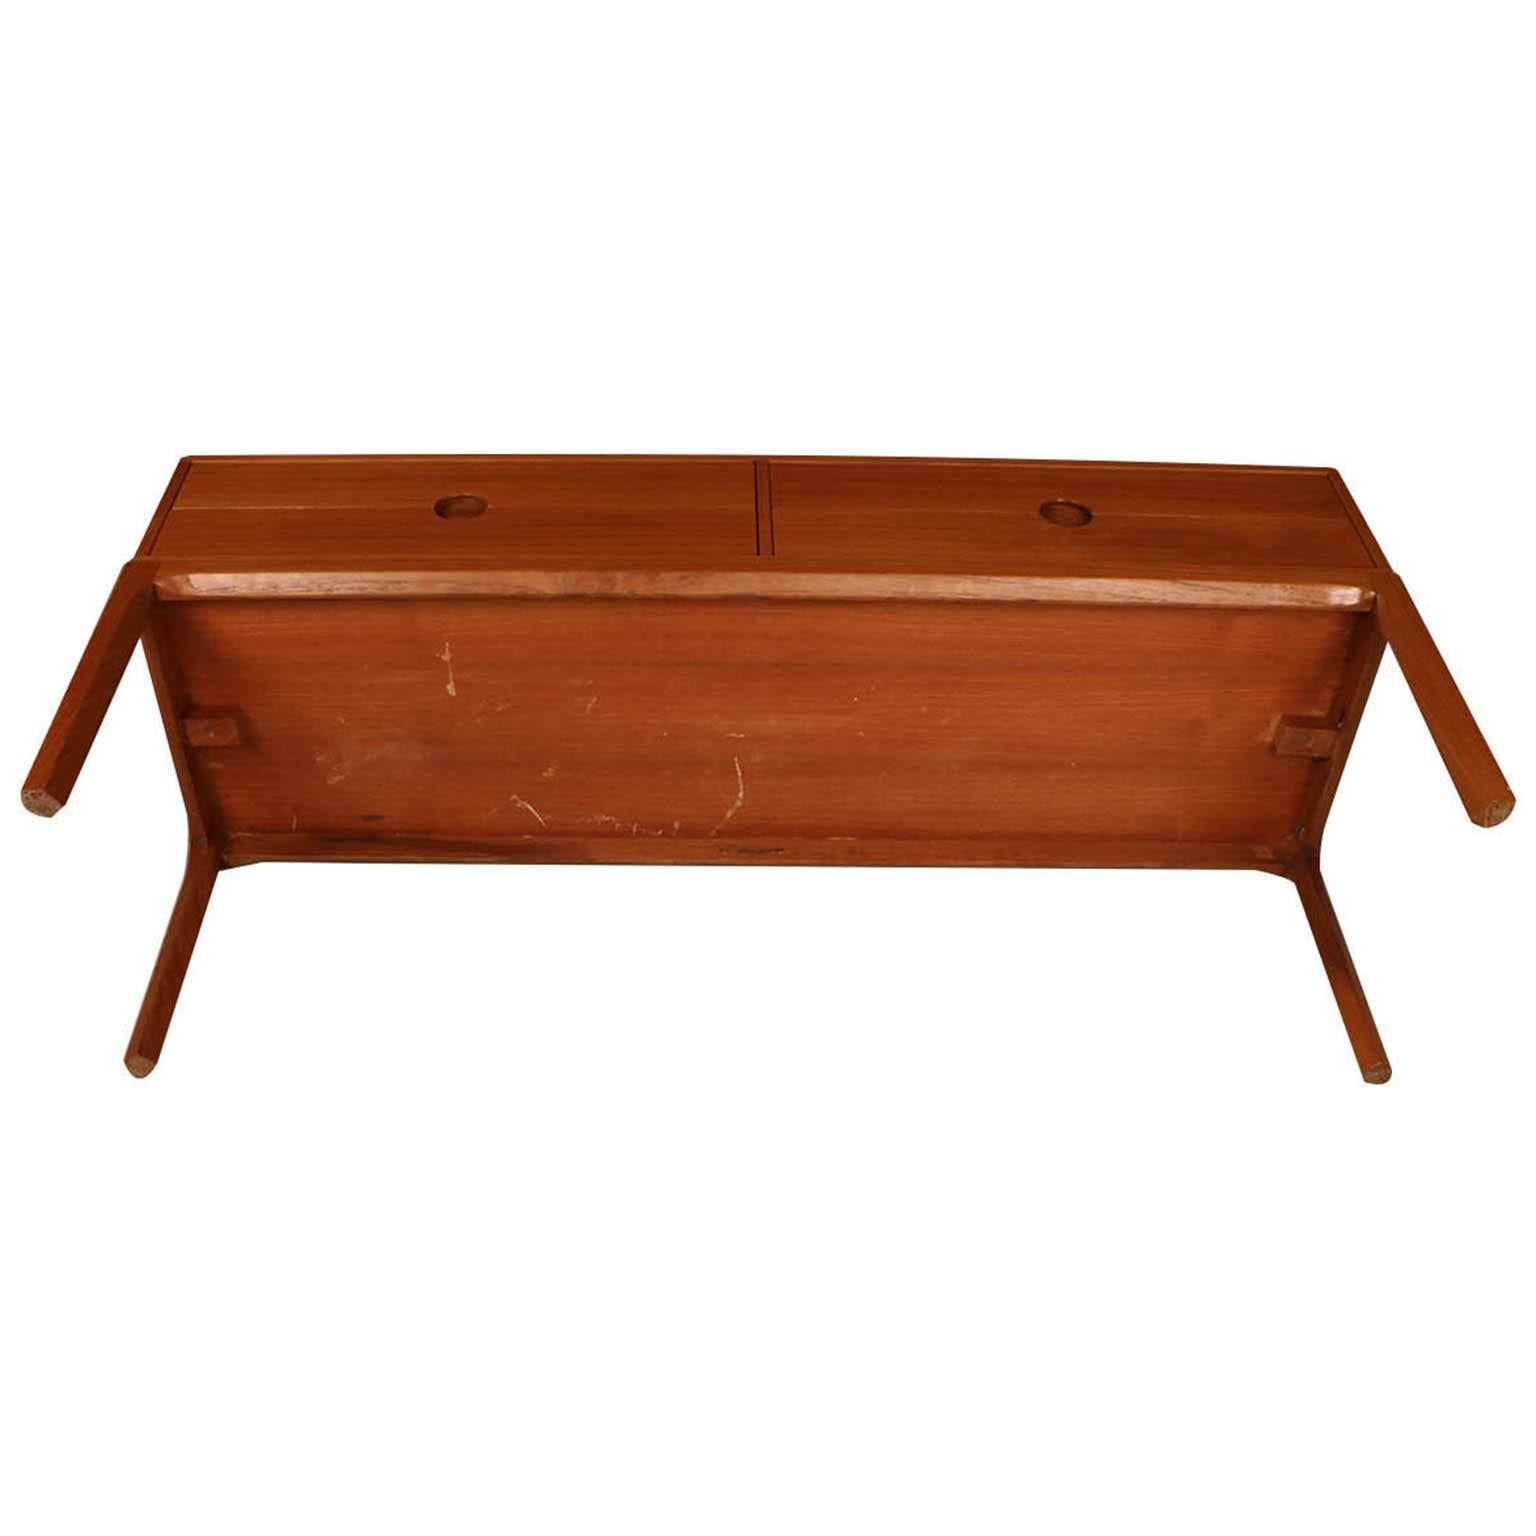 Remarkable iconic teak sideboard / low bench, or side table rare, model no. 394, designed by famous Danish designer Kai Kristiansen for Aksel Kjersgaard, in Denmark. Designed in 1954-1955 and in production until 1963-1964. Features a lovely low